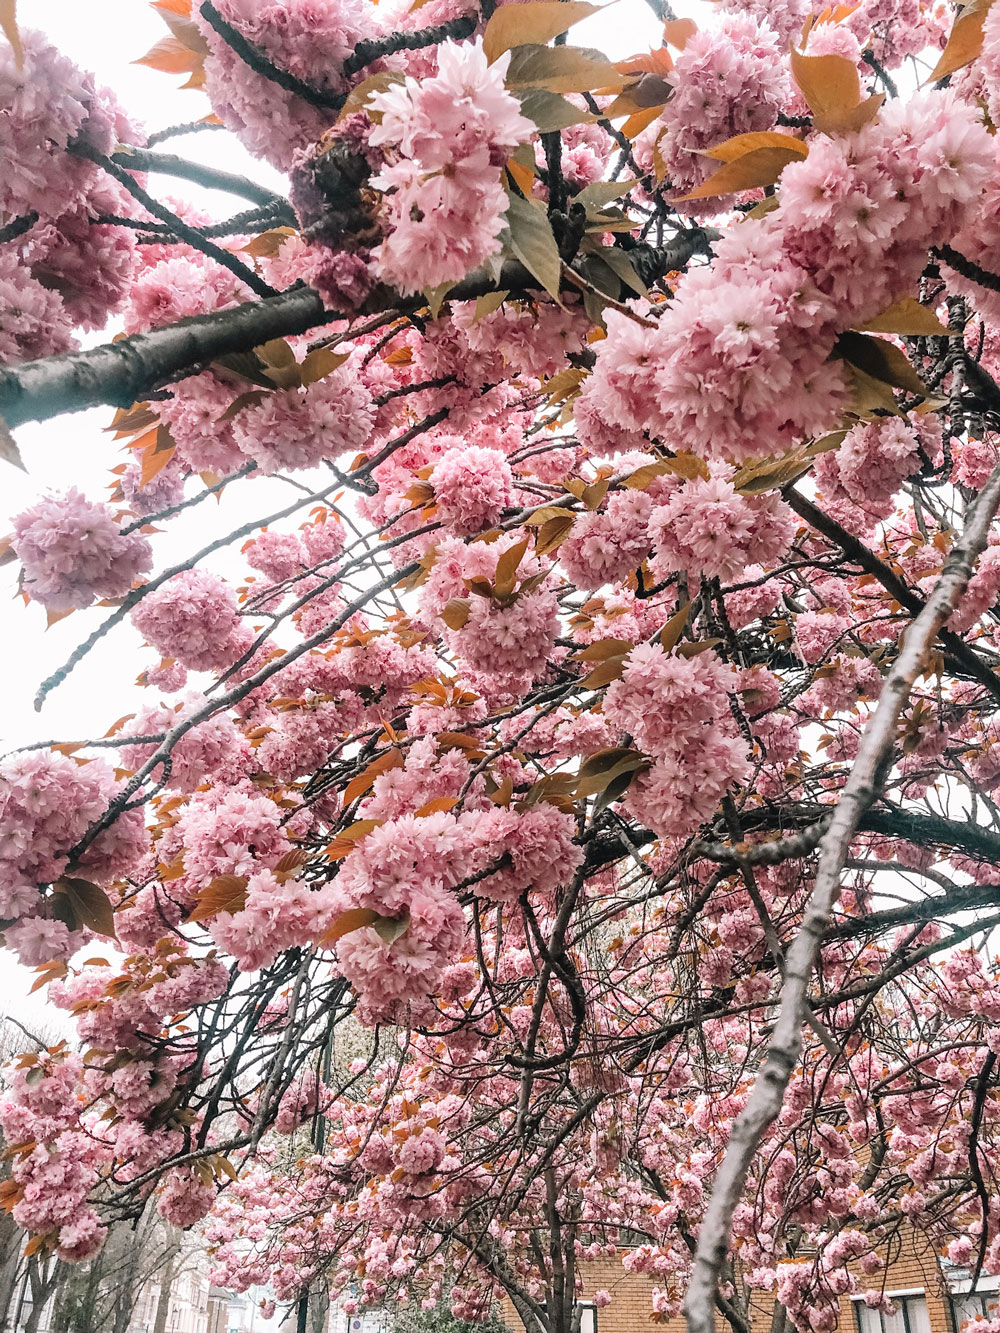 London in bloom with cherry blossoms